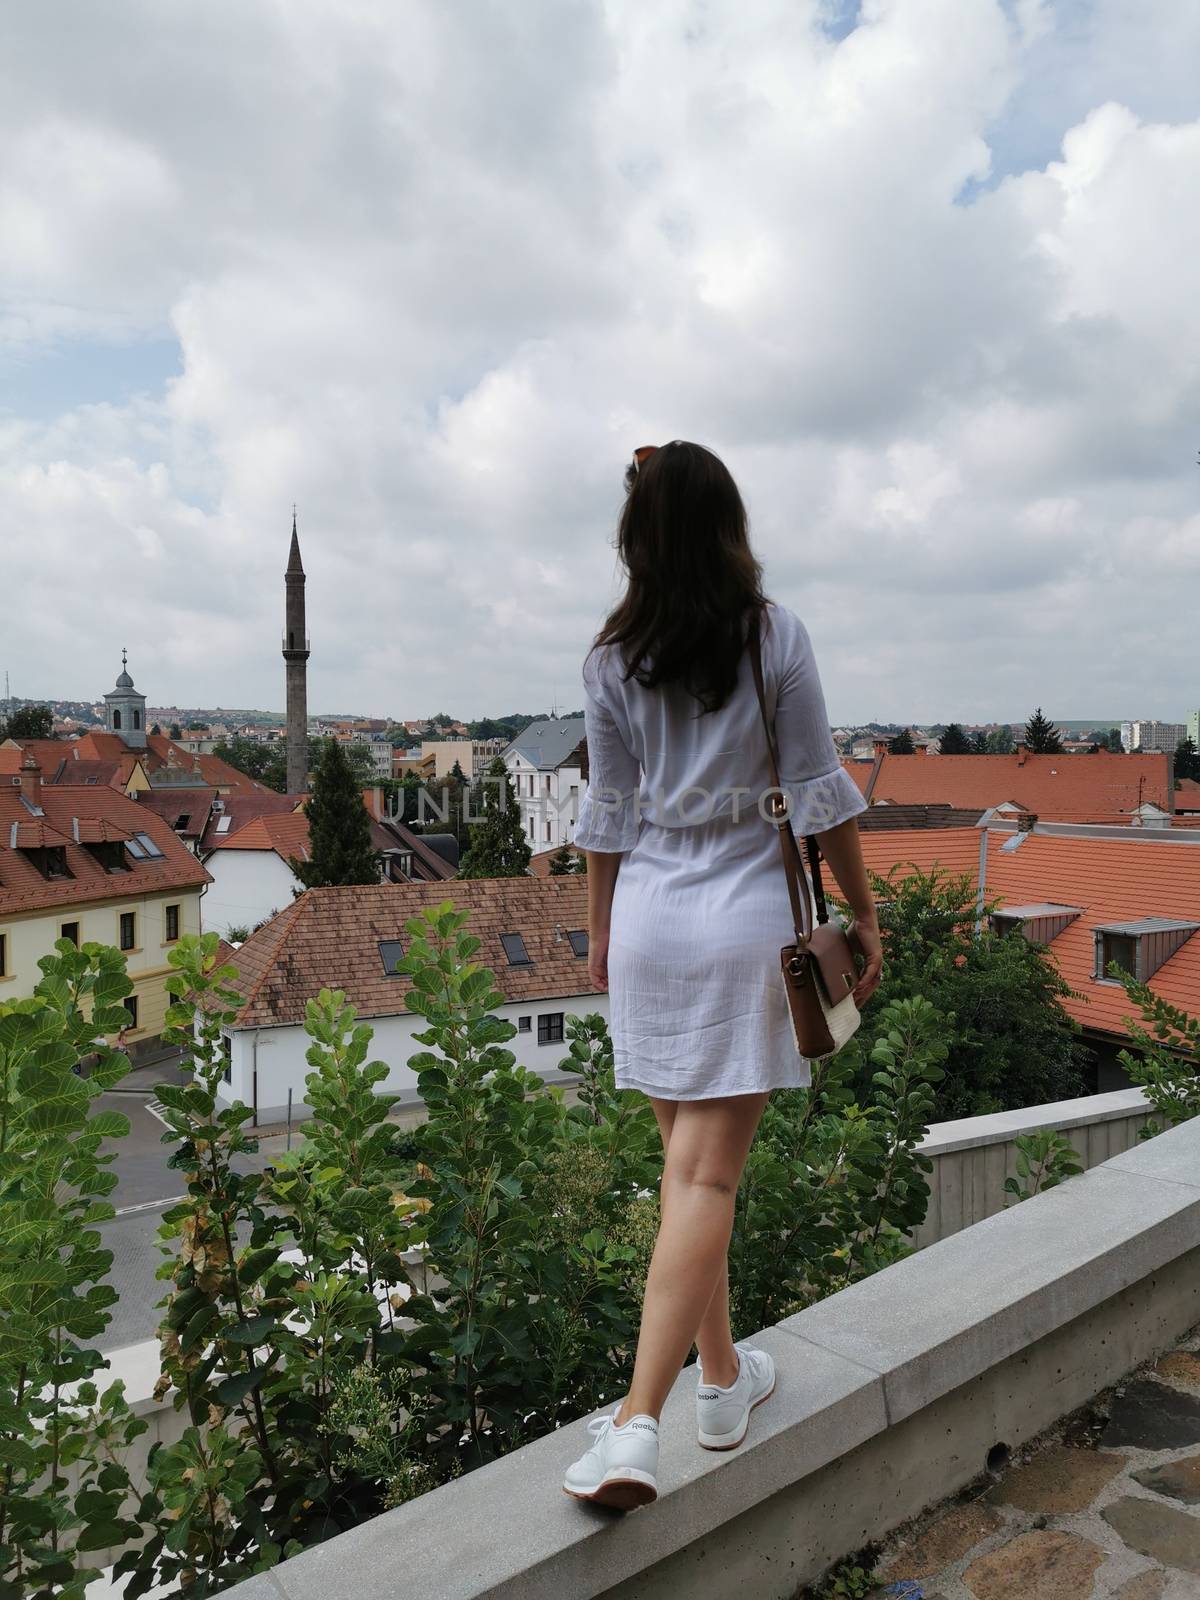 The girl from the Castle of Eger looks at the city High quality photo